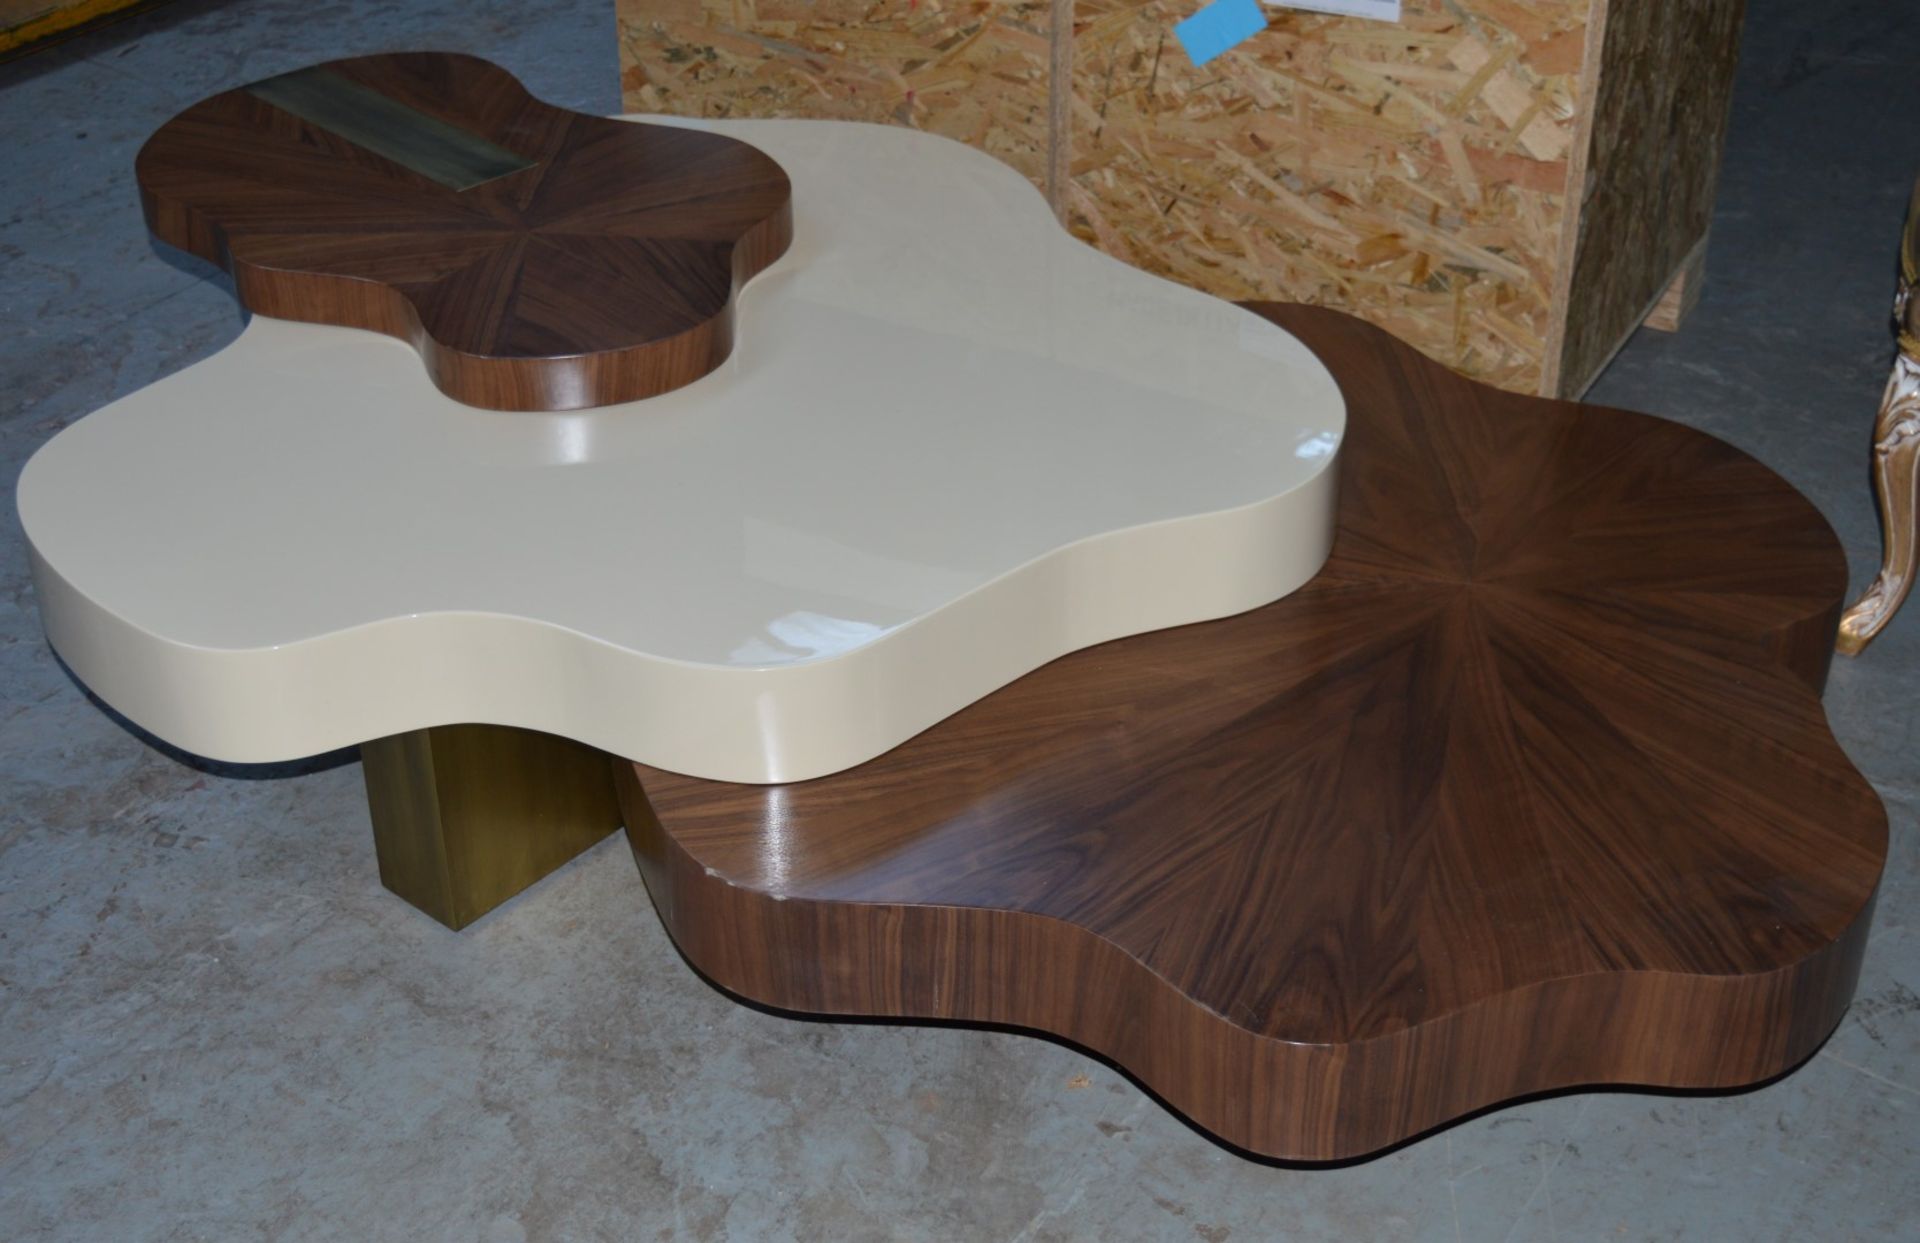 1 x Ginger & Jagger Nenhuphar Coffee Table - Urbanmint Design - Eye Catching Design - Walnut and - Image 5 of 15